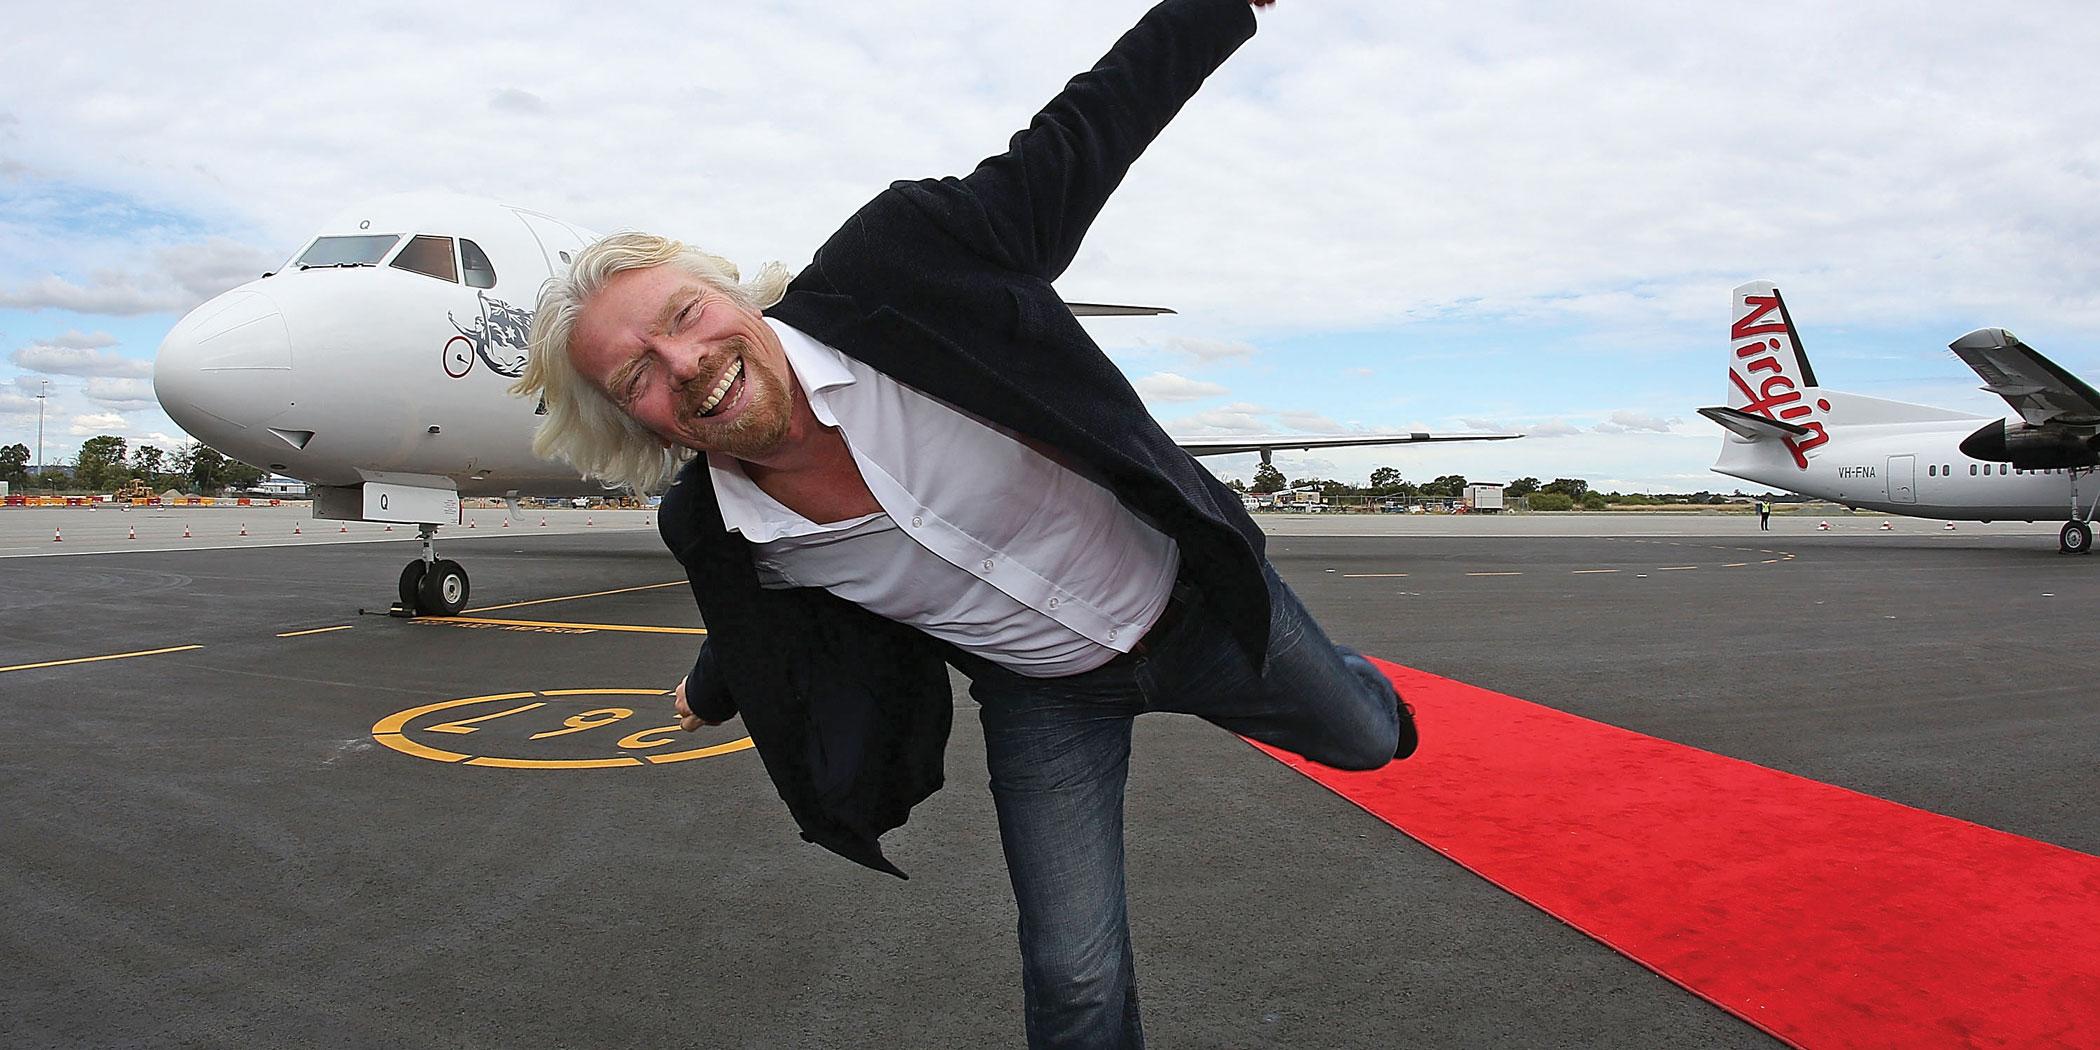 Sir Richard Branson, who appeared on our cover in 2008 and 2014